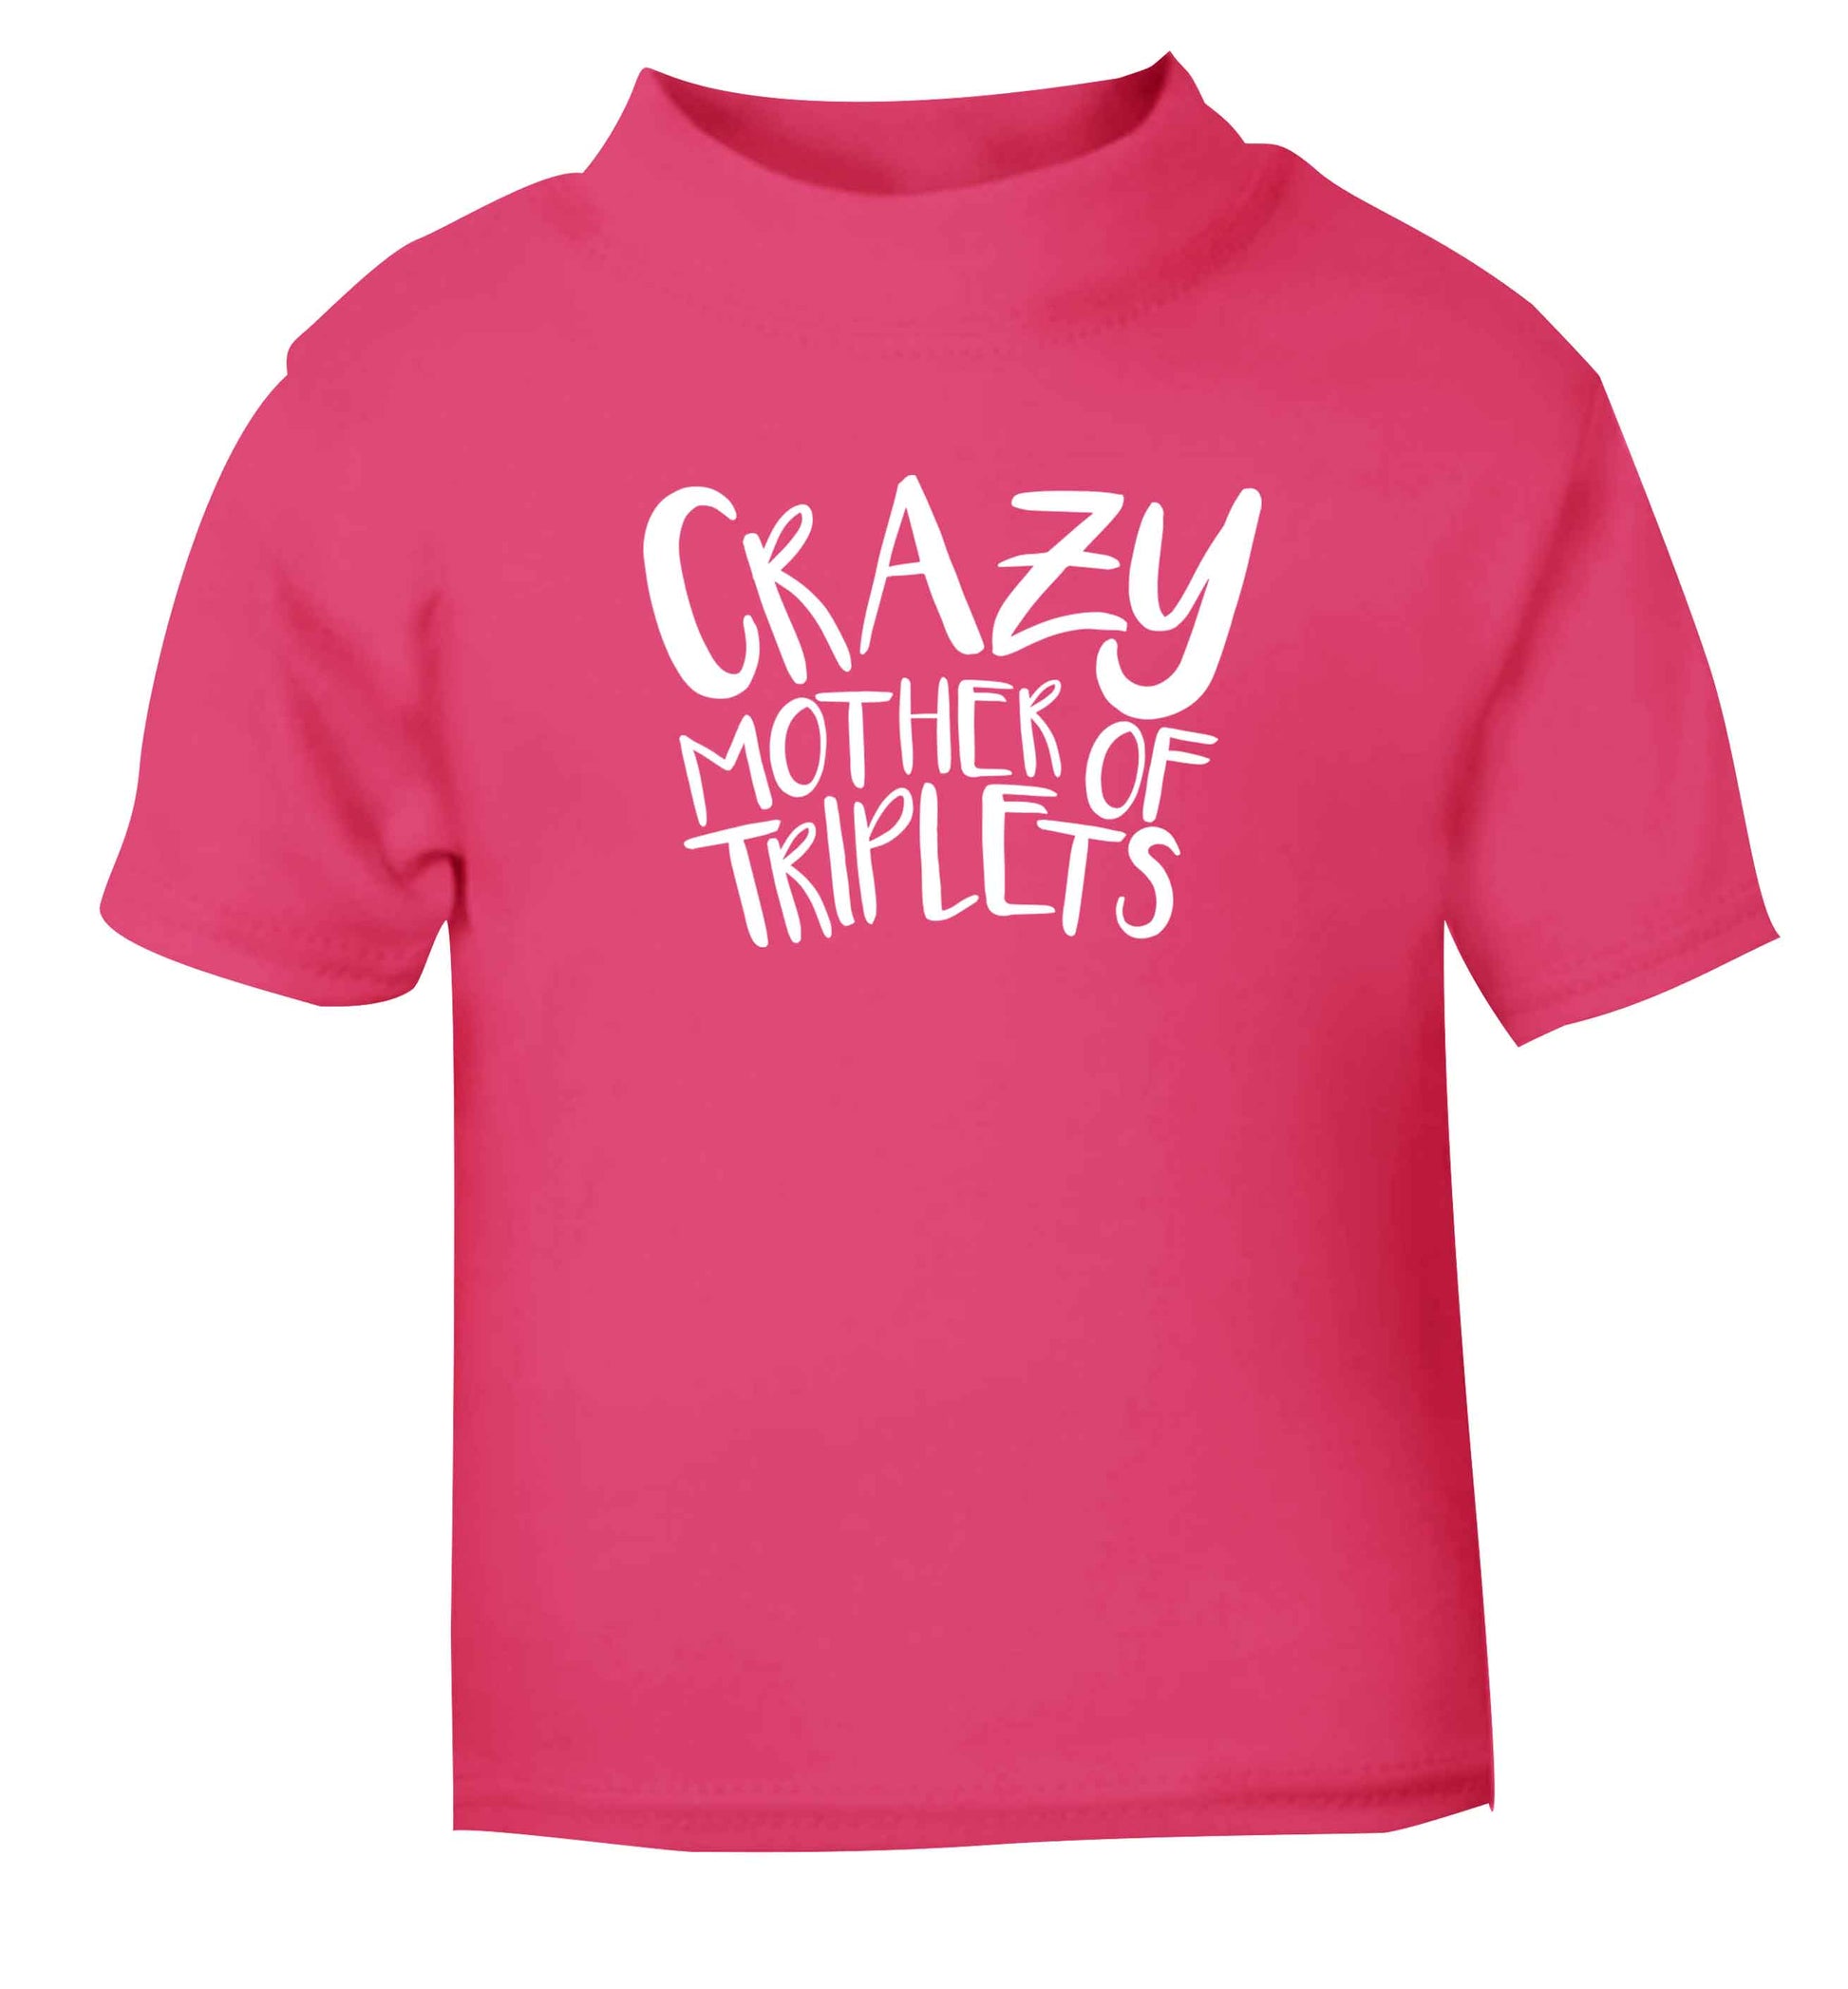 Crazy mother of triplets pink baby toddler Tshirt 2 Years